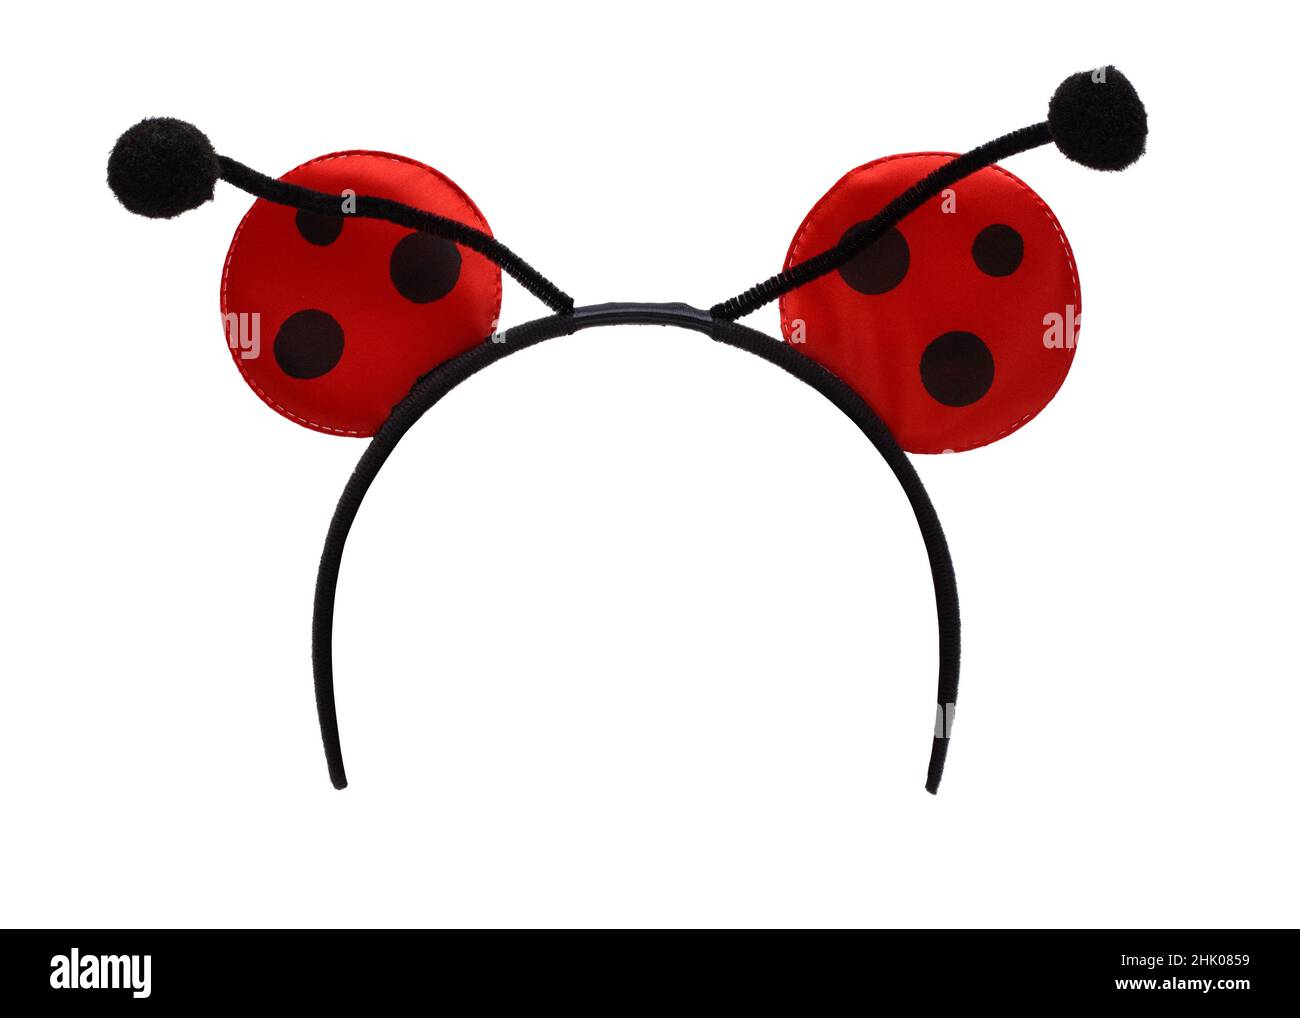 Lady Bug Headband Costume Ears Cut Out on White. Banque D'Images